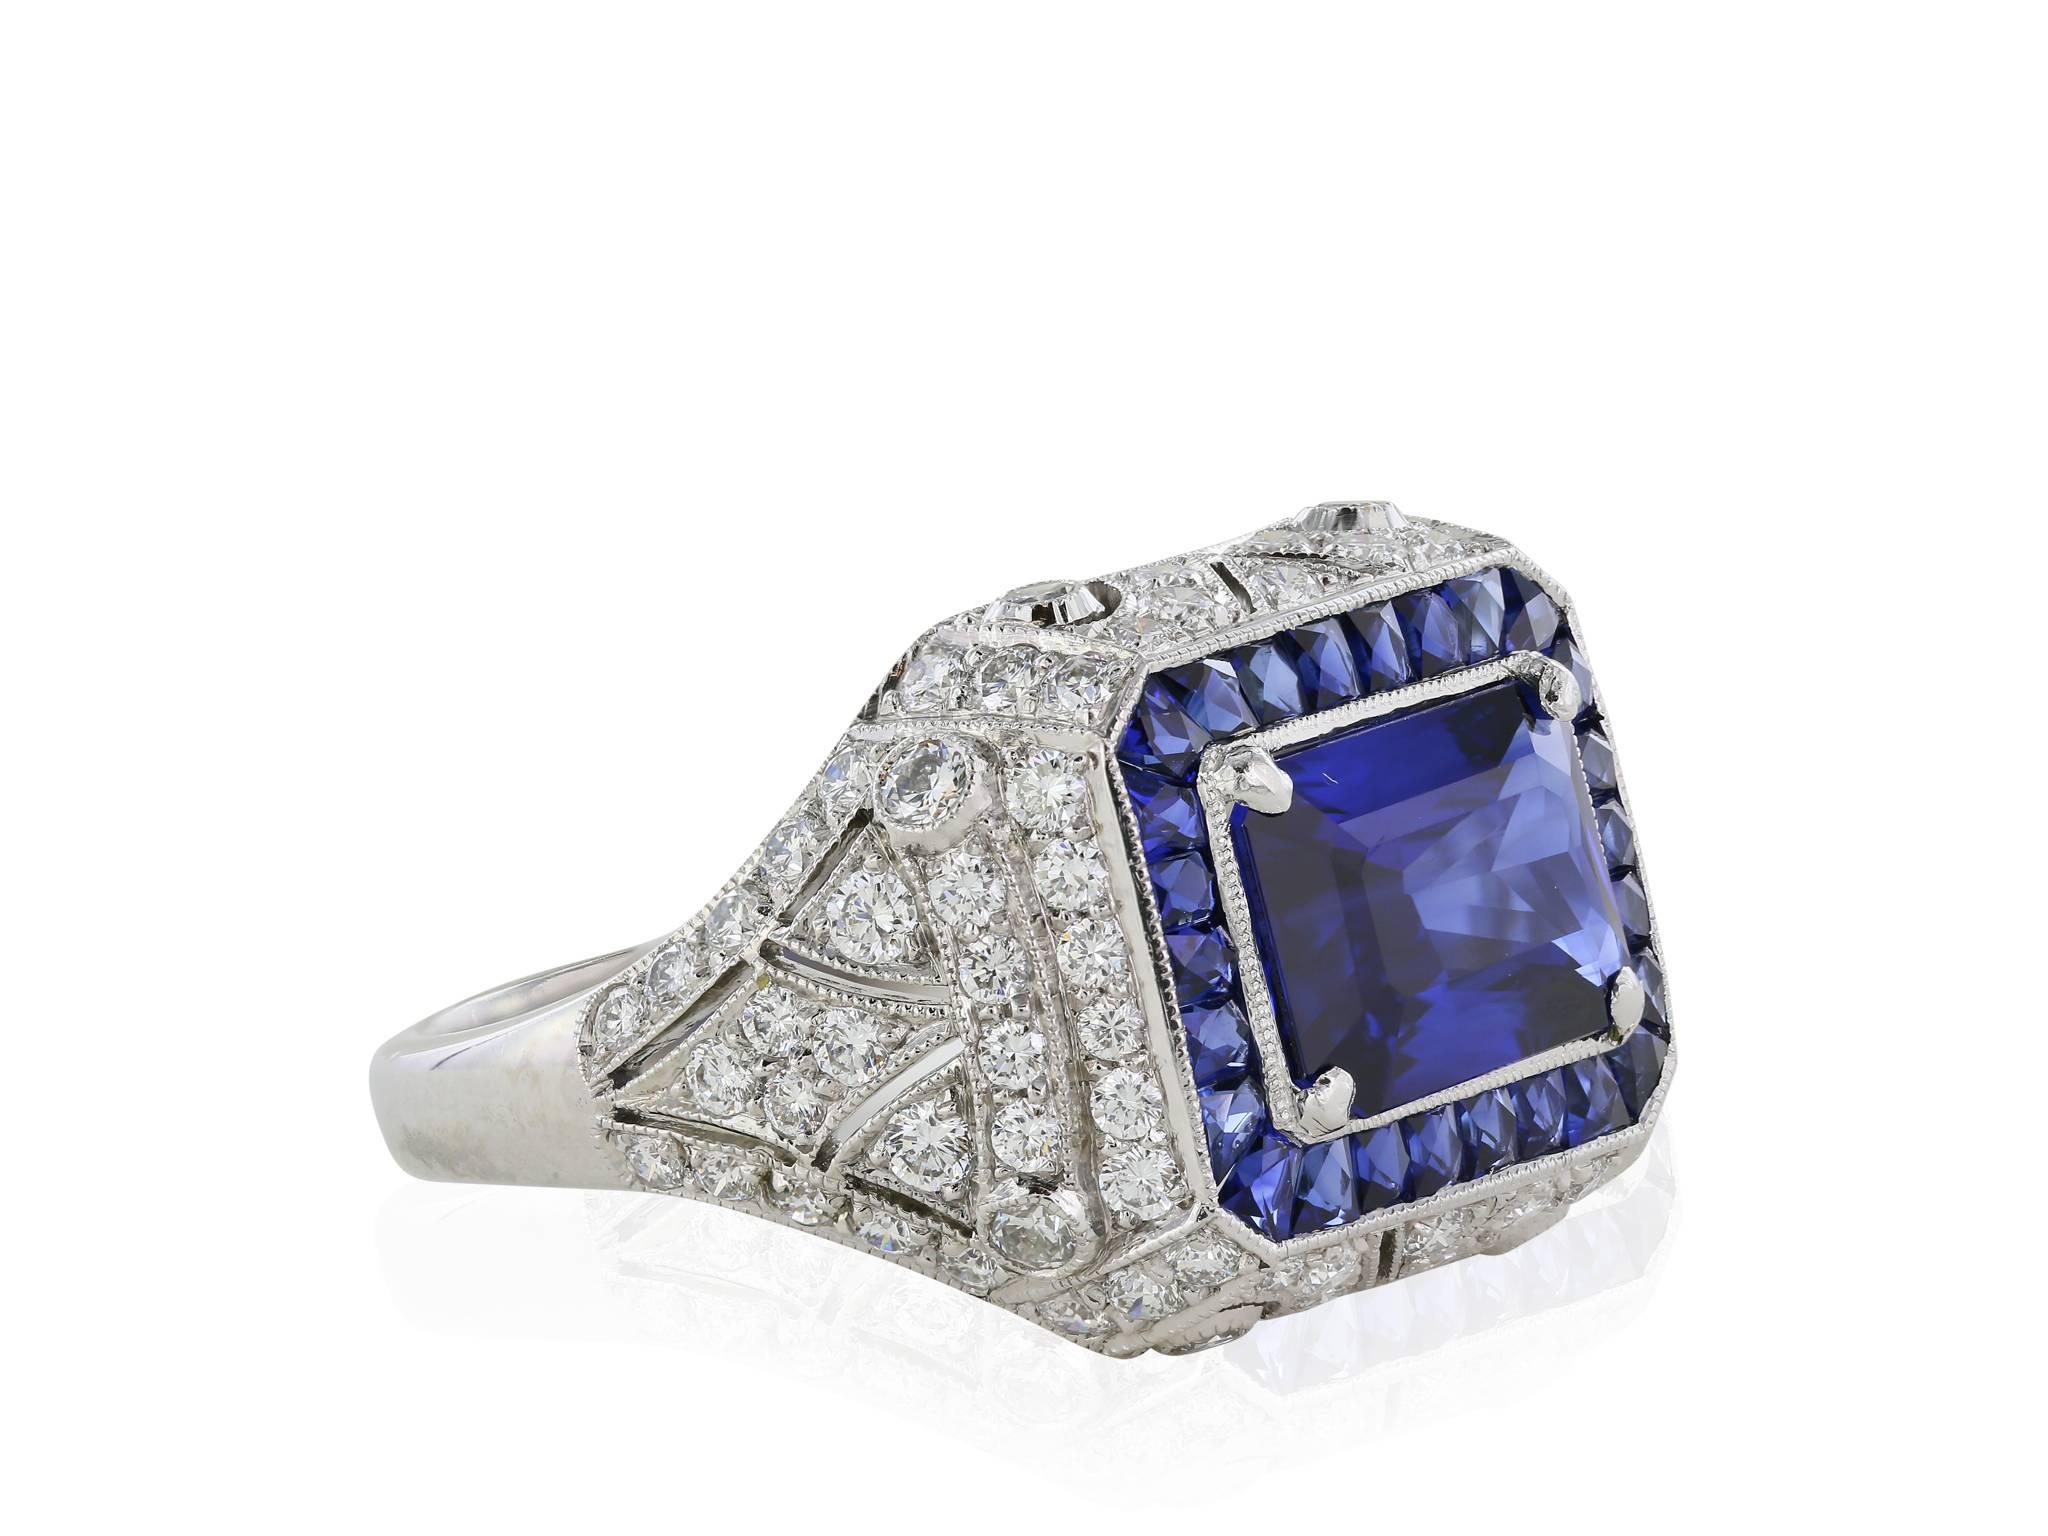 Sapphire and Diamond ring featuring one 2.64 emerald cut sapphire with a GRS report. The sapphire is set in an art deco style platinum sapphire and diamond mounting. There are 26 custom cut sapphires.